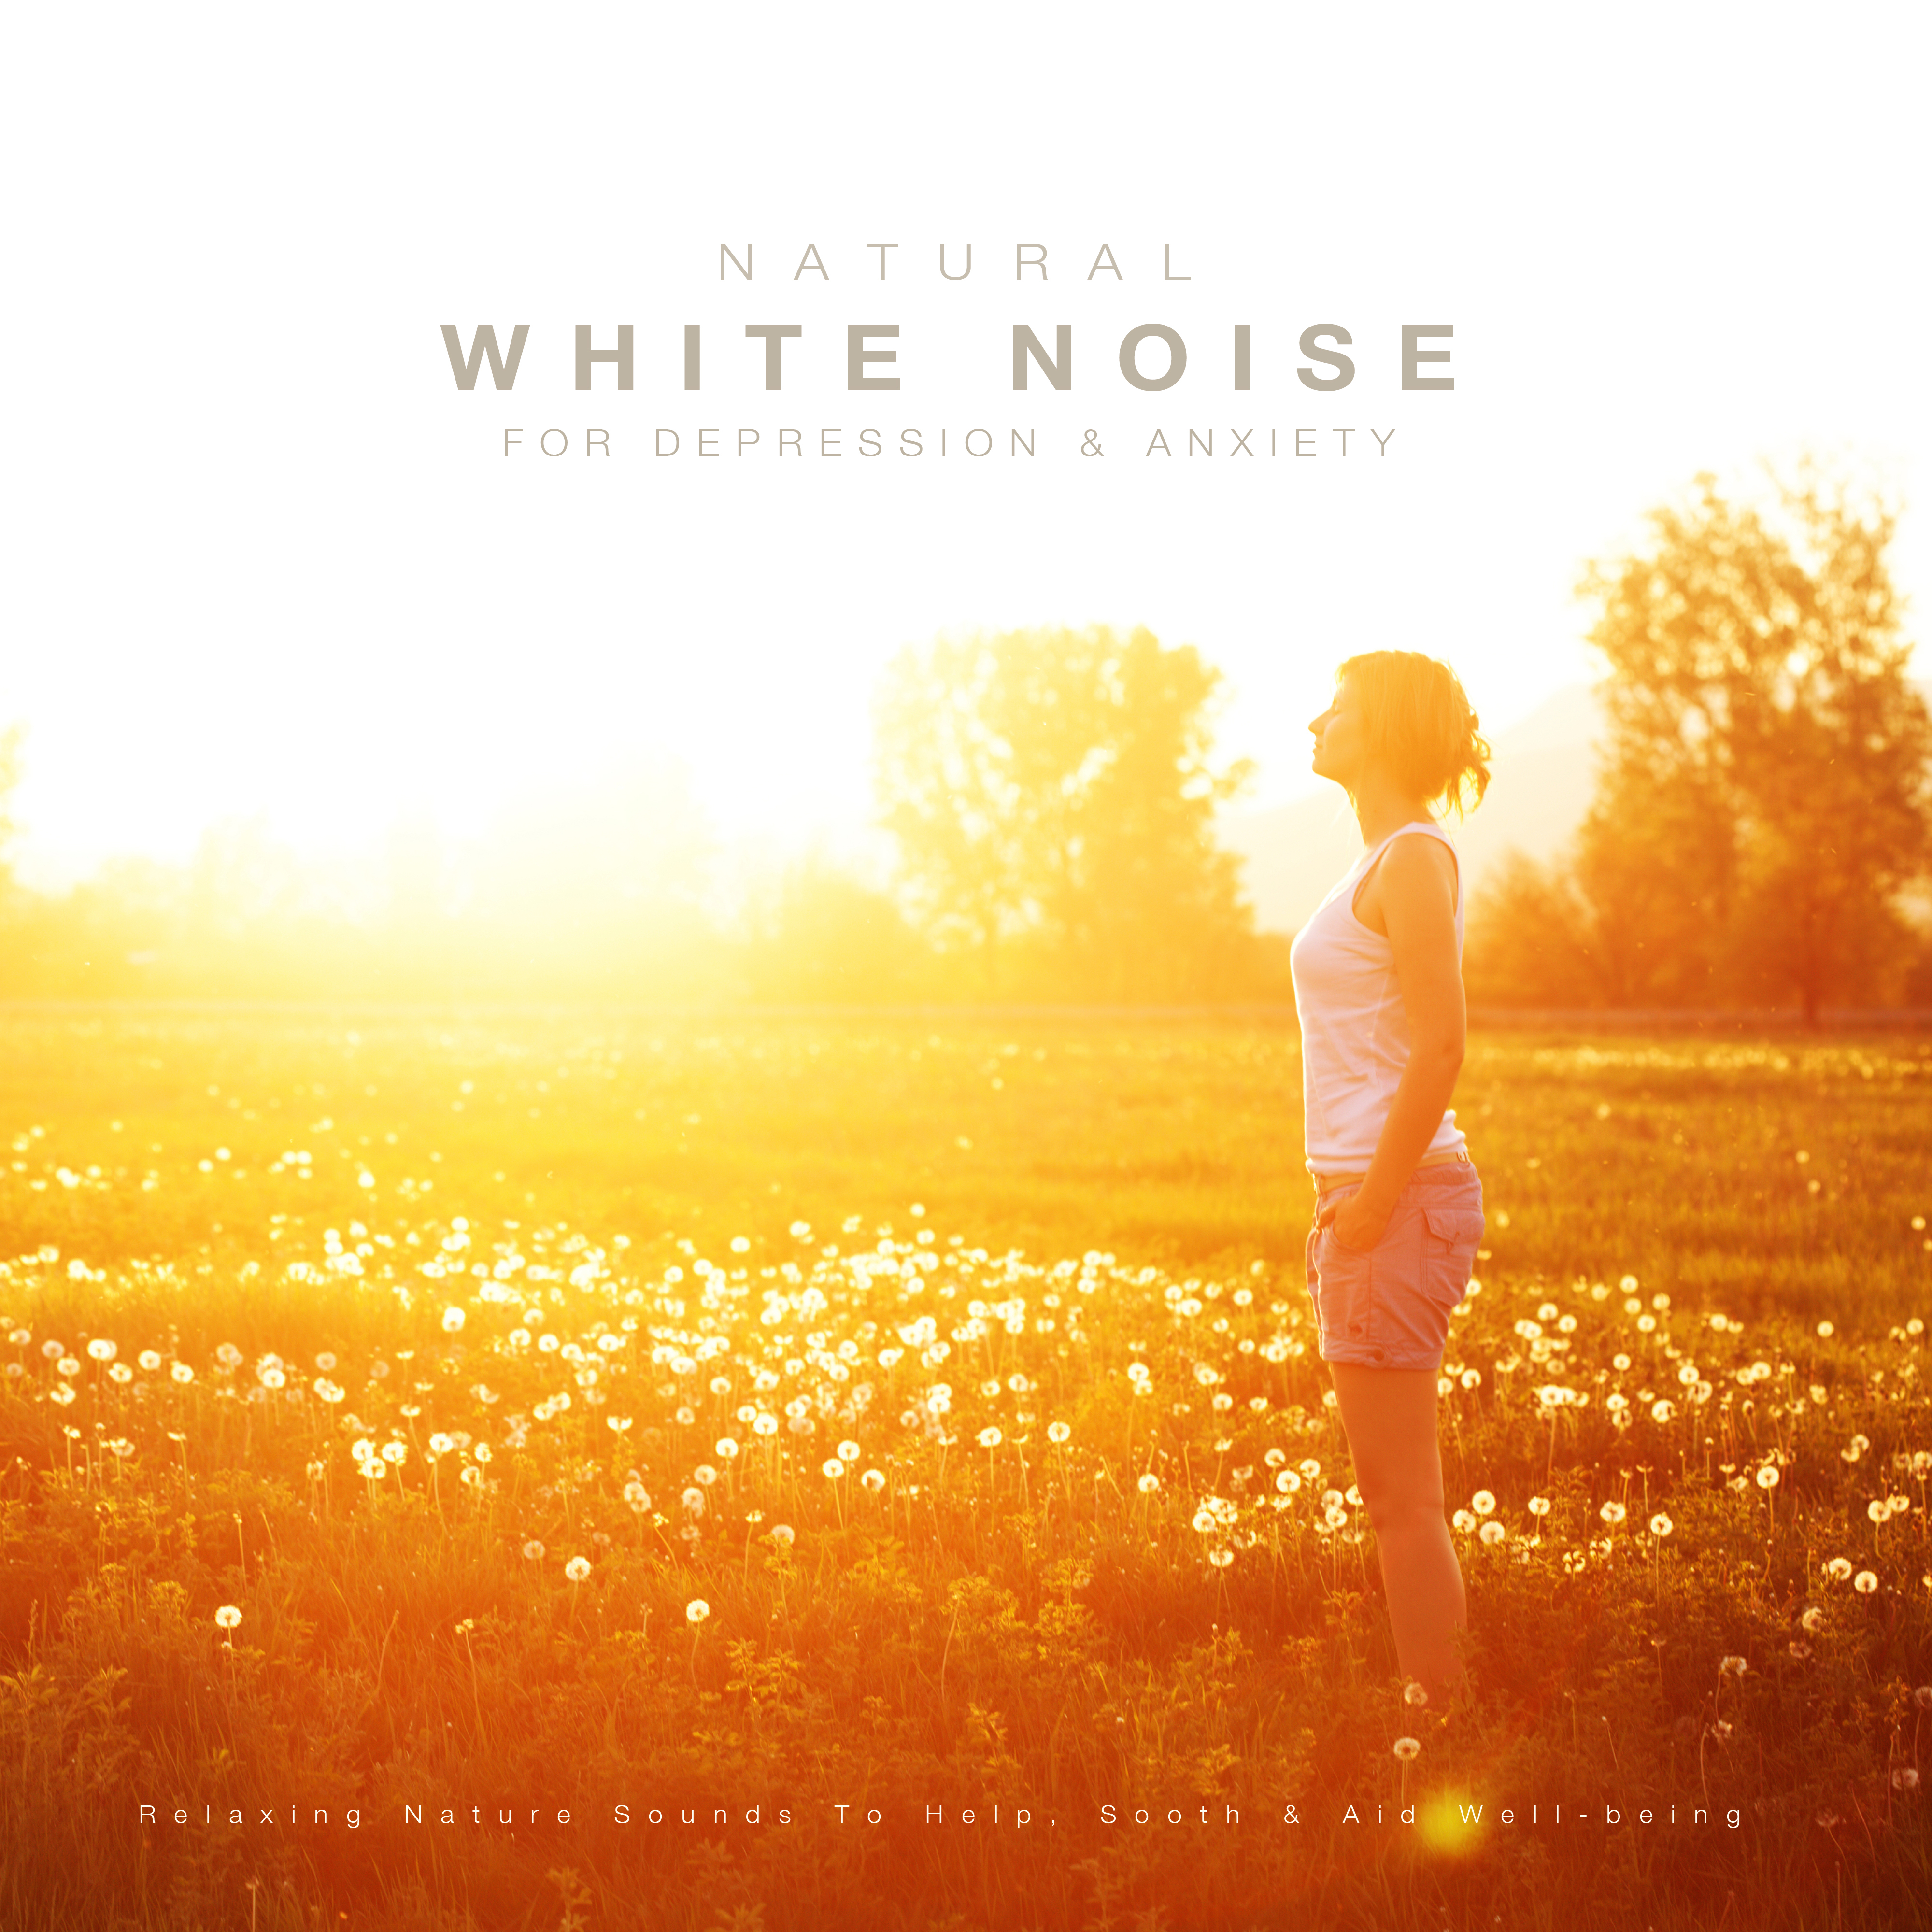 Natural White Noise for Anxiety & Depression: Relaxing Nature Sounds to Help, Sooth & Aid Well-Being